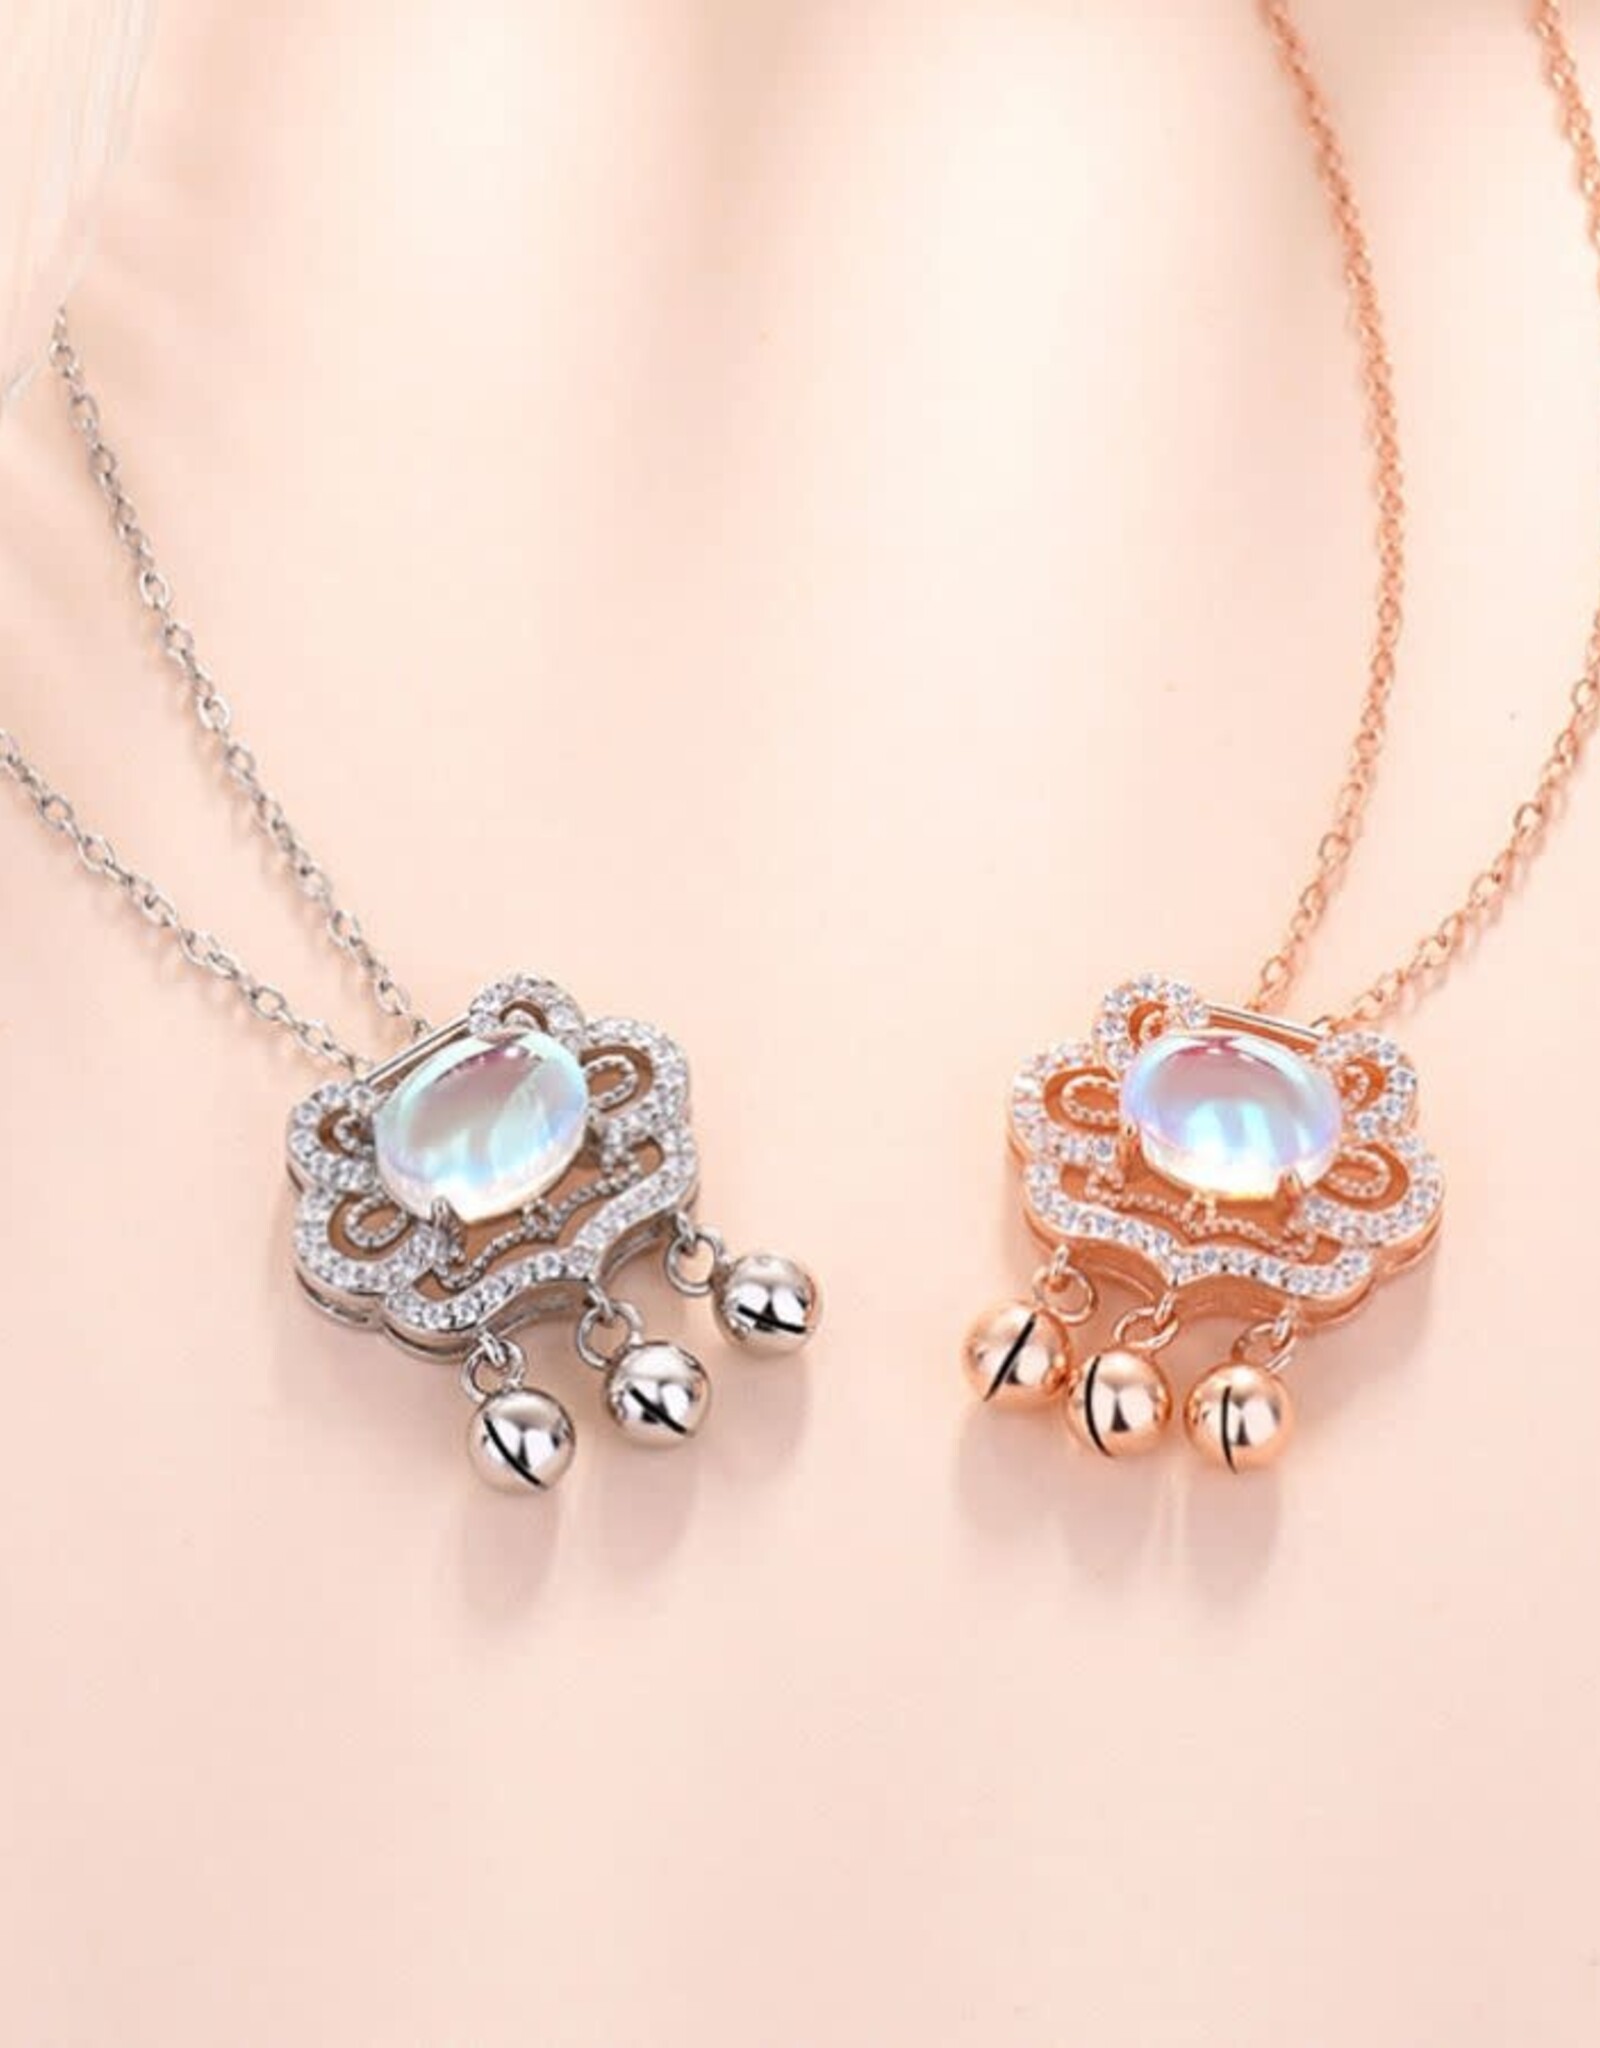 Finaella USA Fashion Jewelry Necklace Crystal Pendant Set in Sterling Silver Gold-Plated